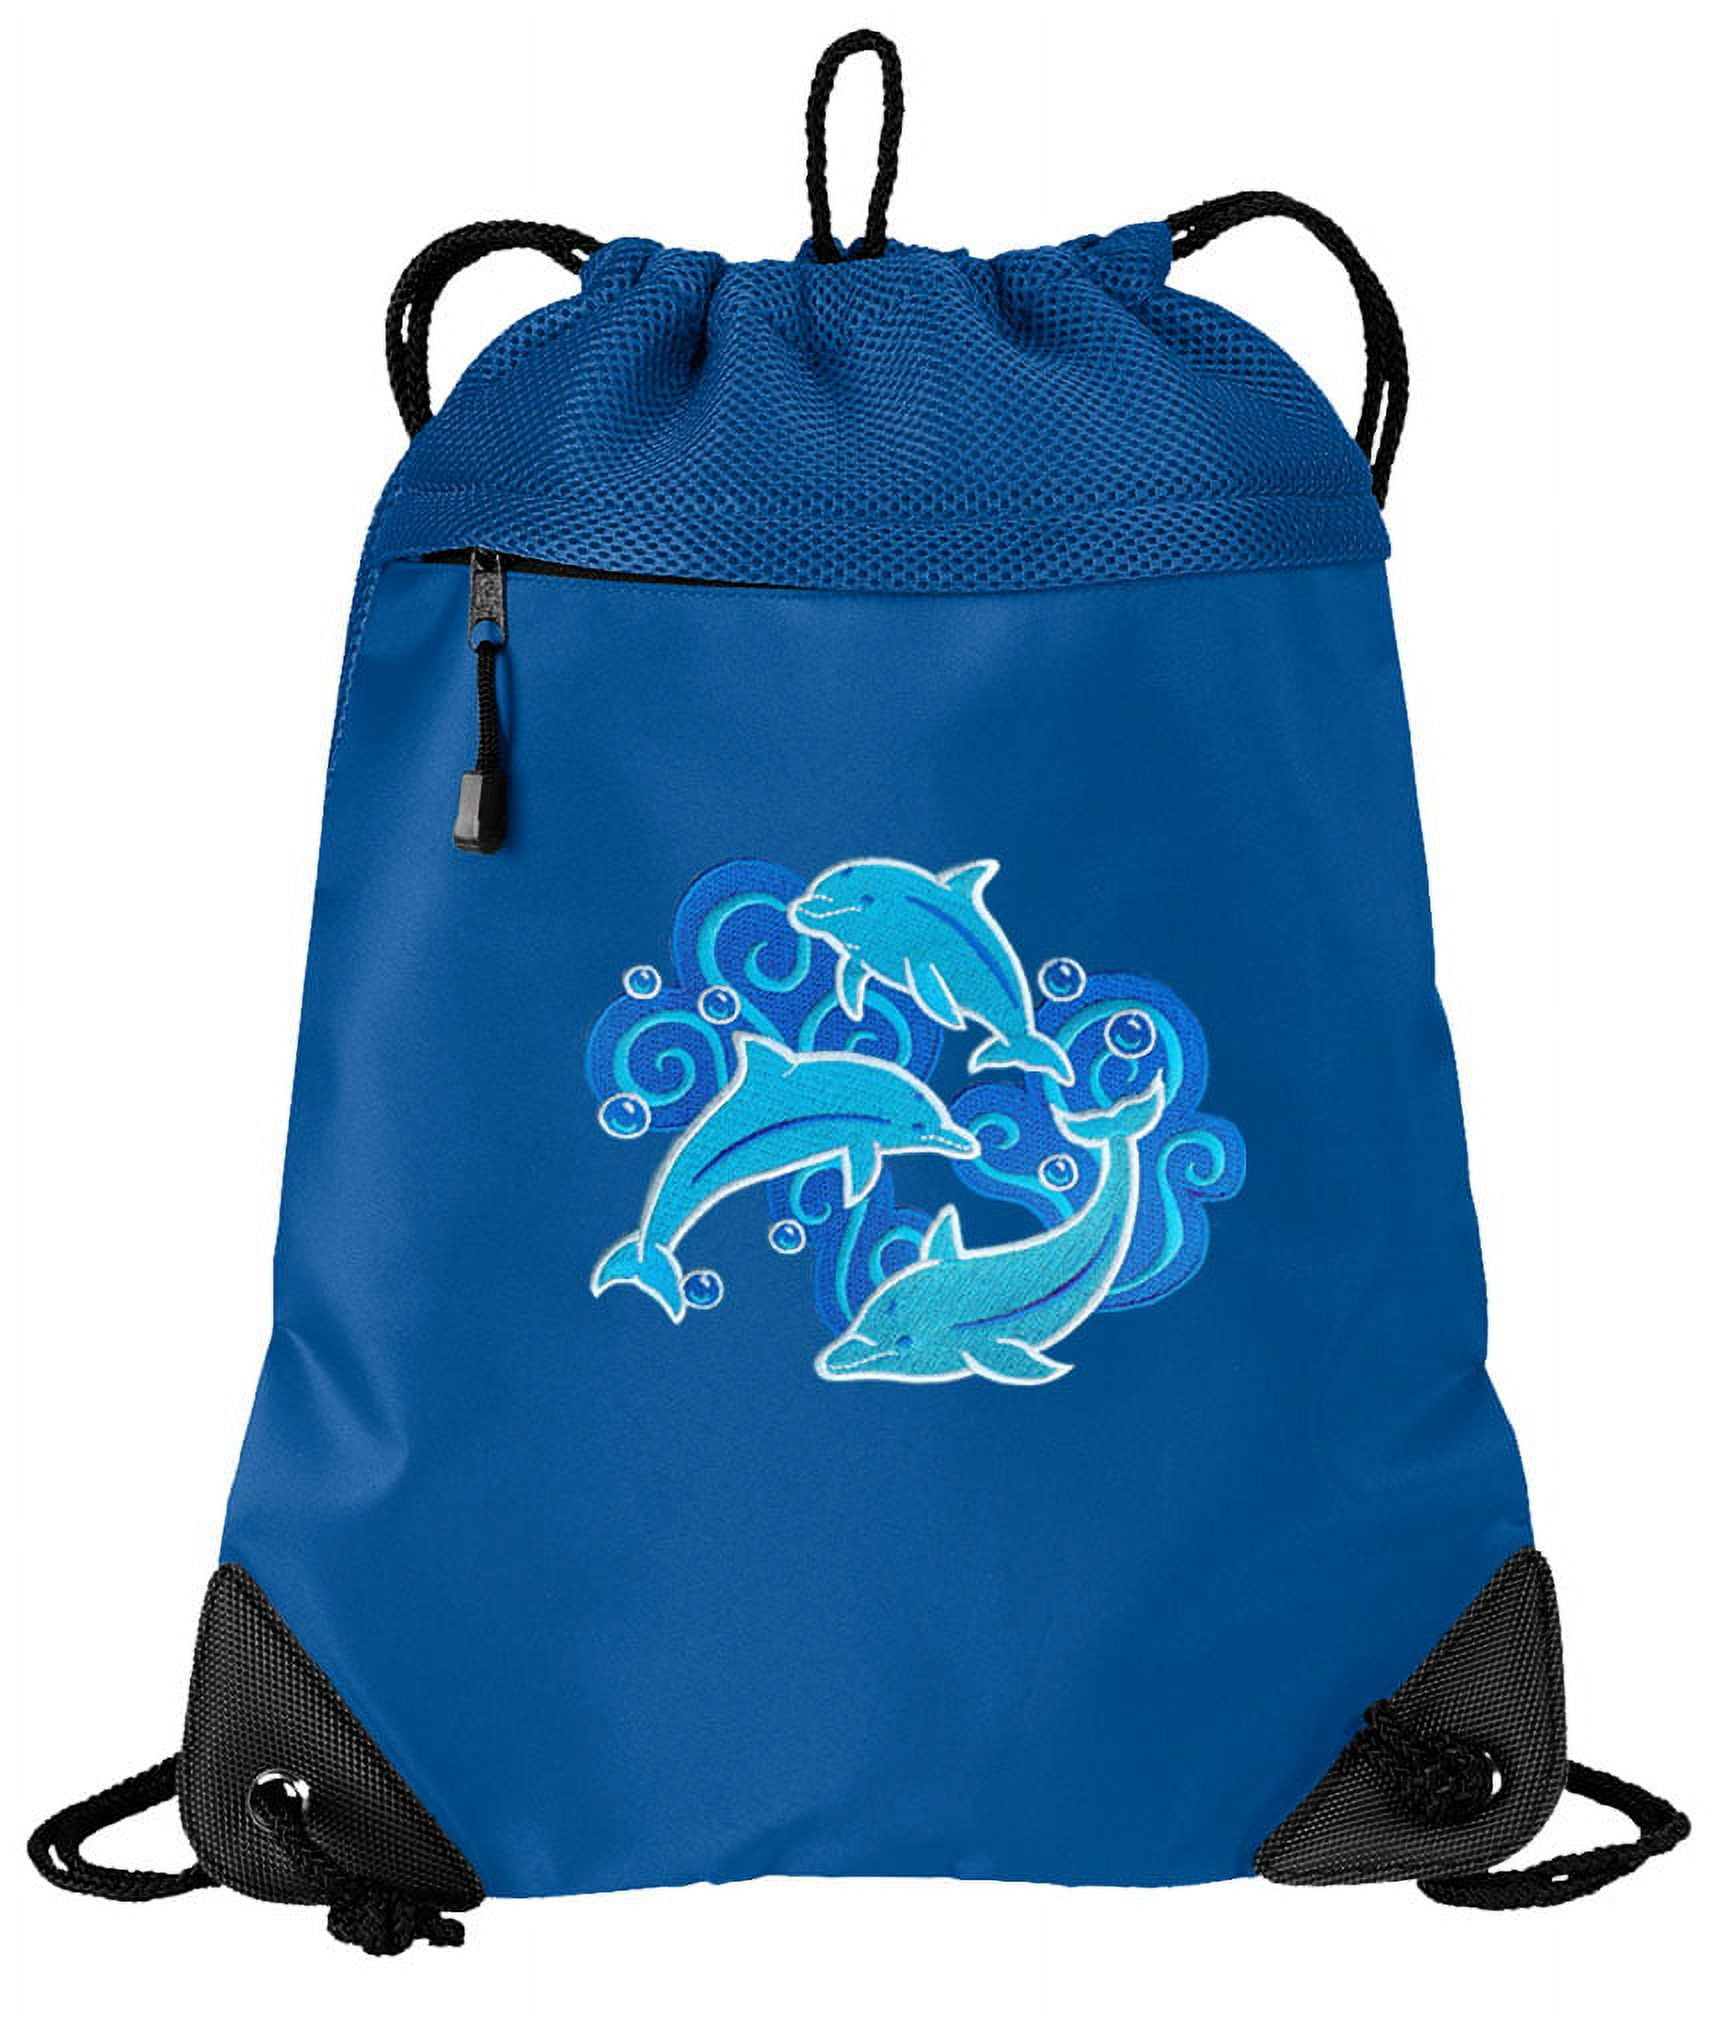 Dolphin Cinch Backpack Dolphins Drawstring Bag String Pack Mesh ...